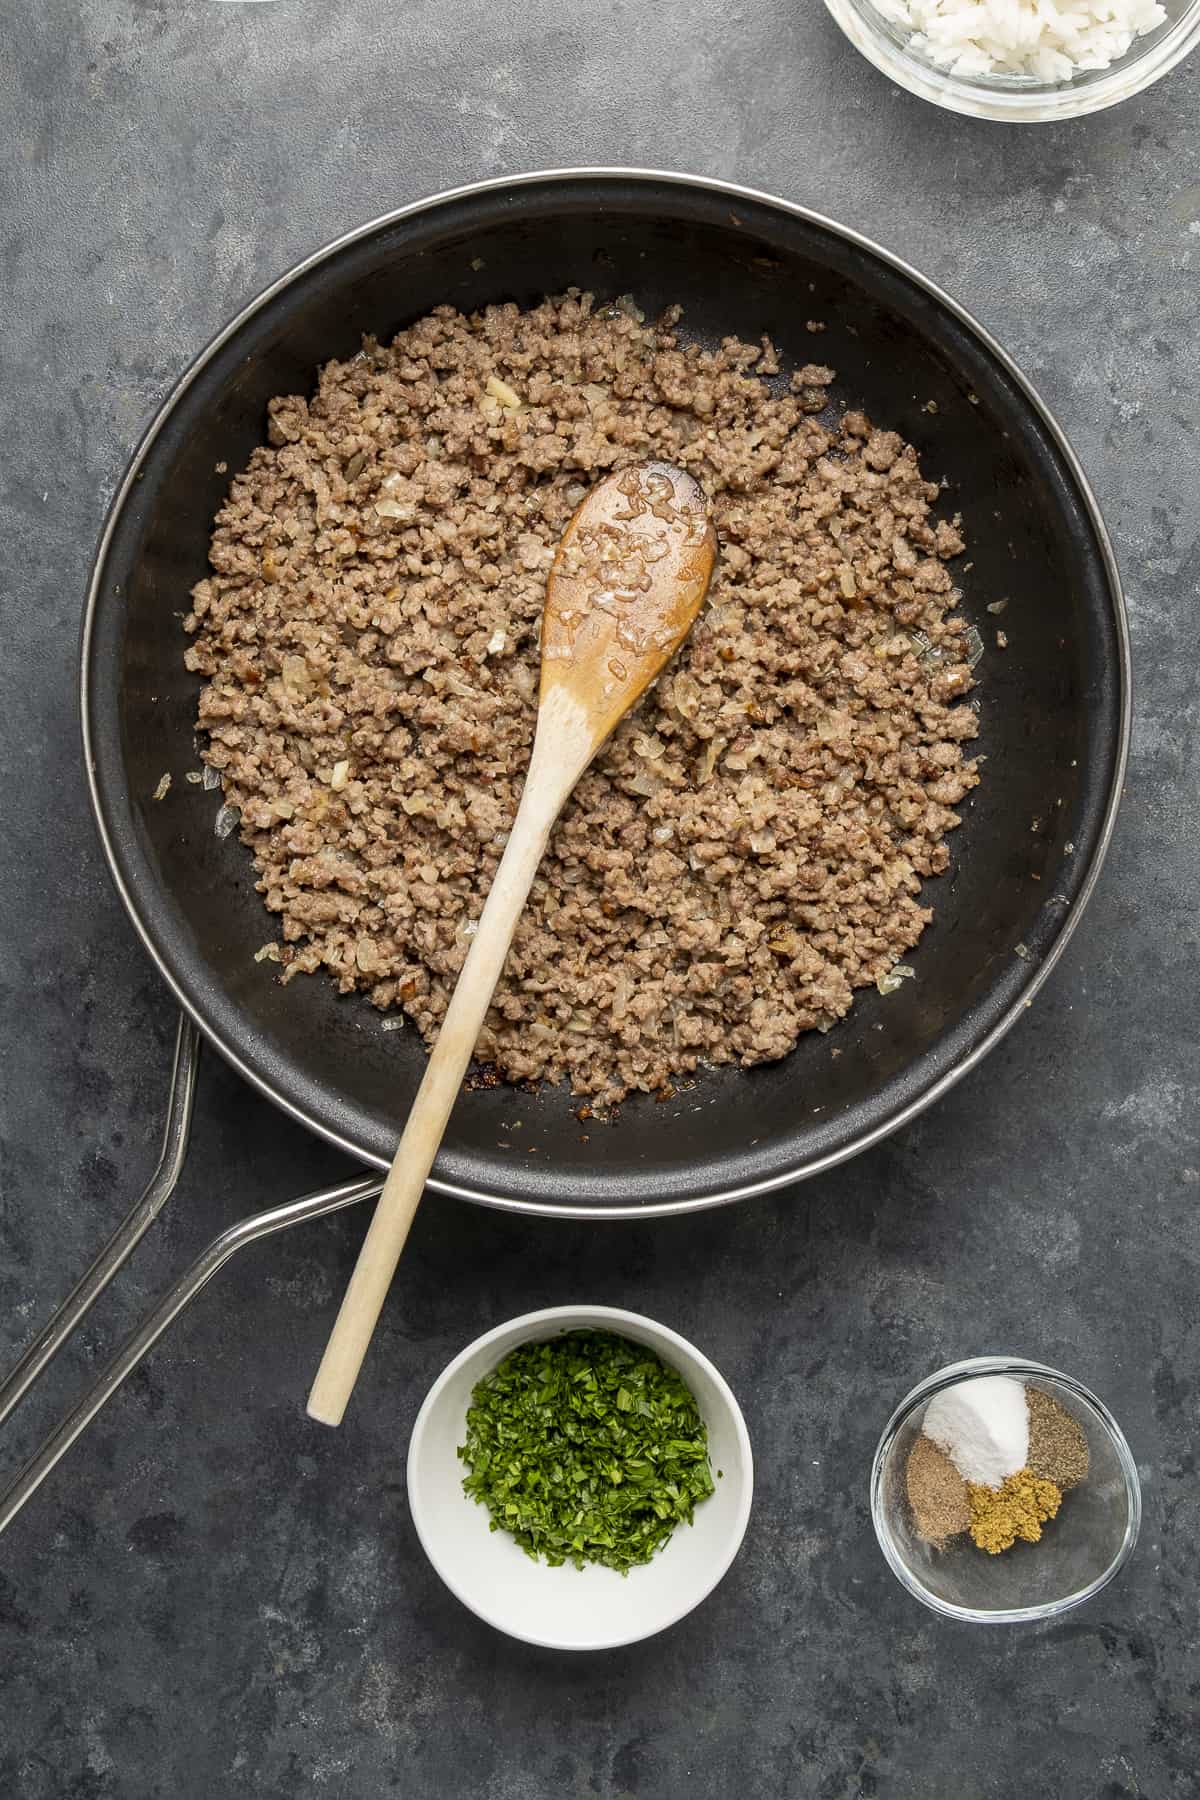 Ground beef cooked in a non-stick pan and a wooden spoon inside it.